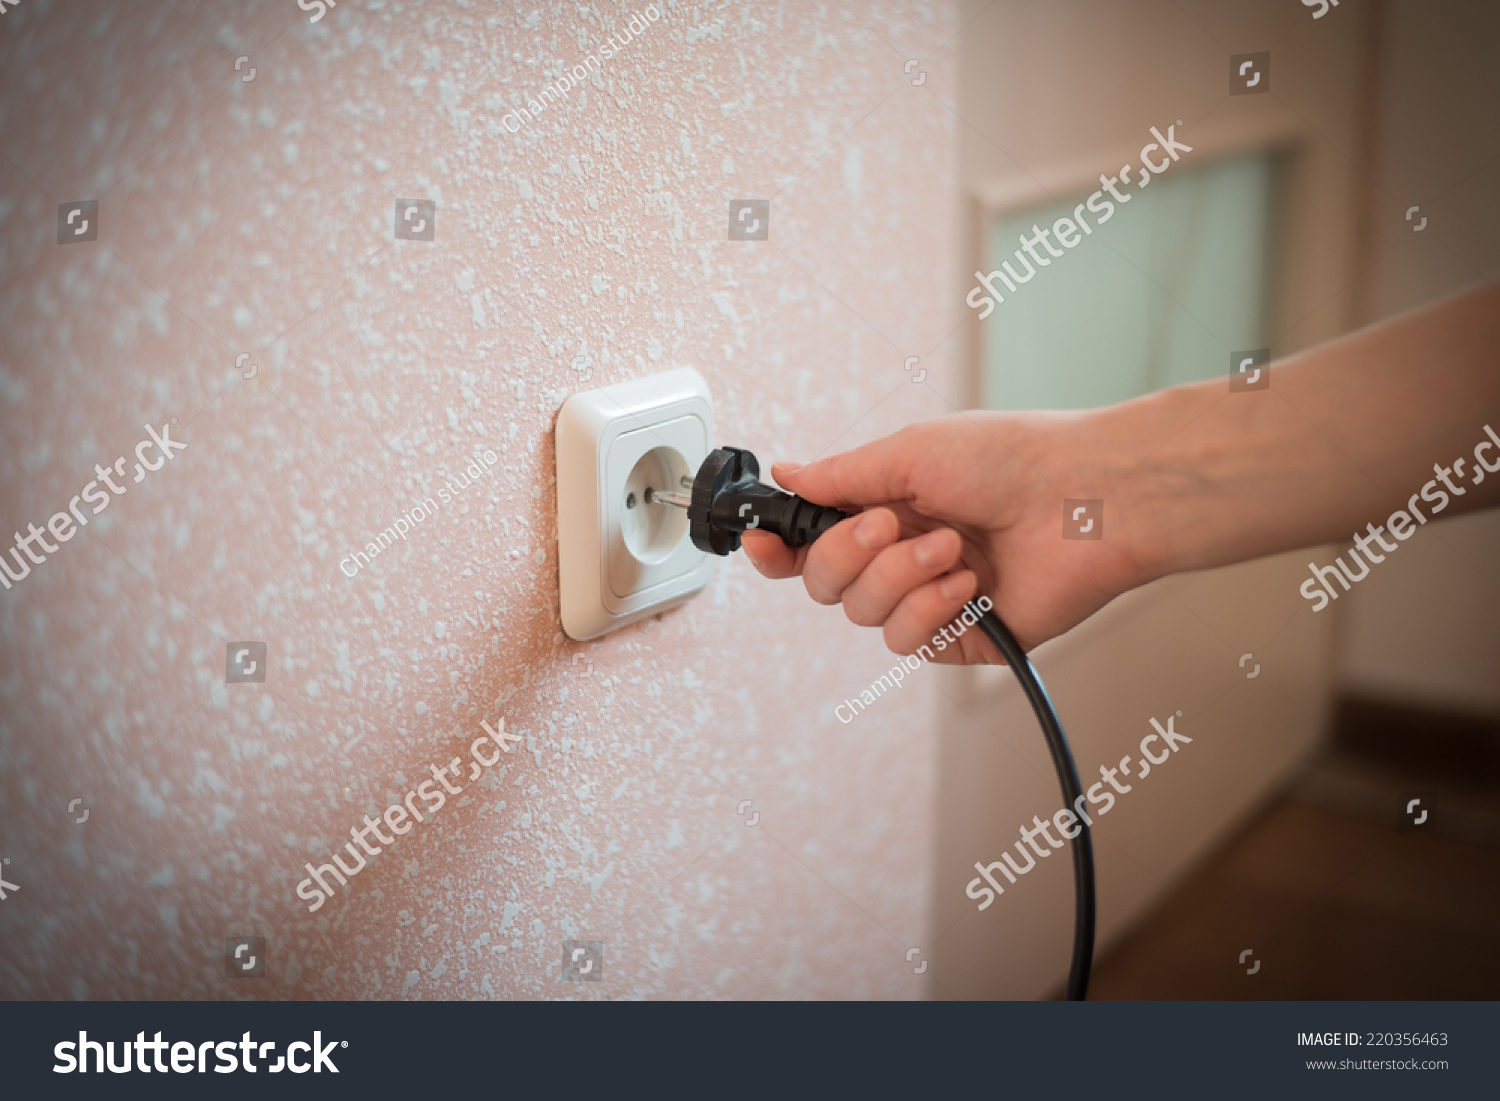 Pull this plug will